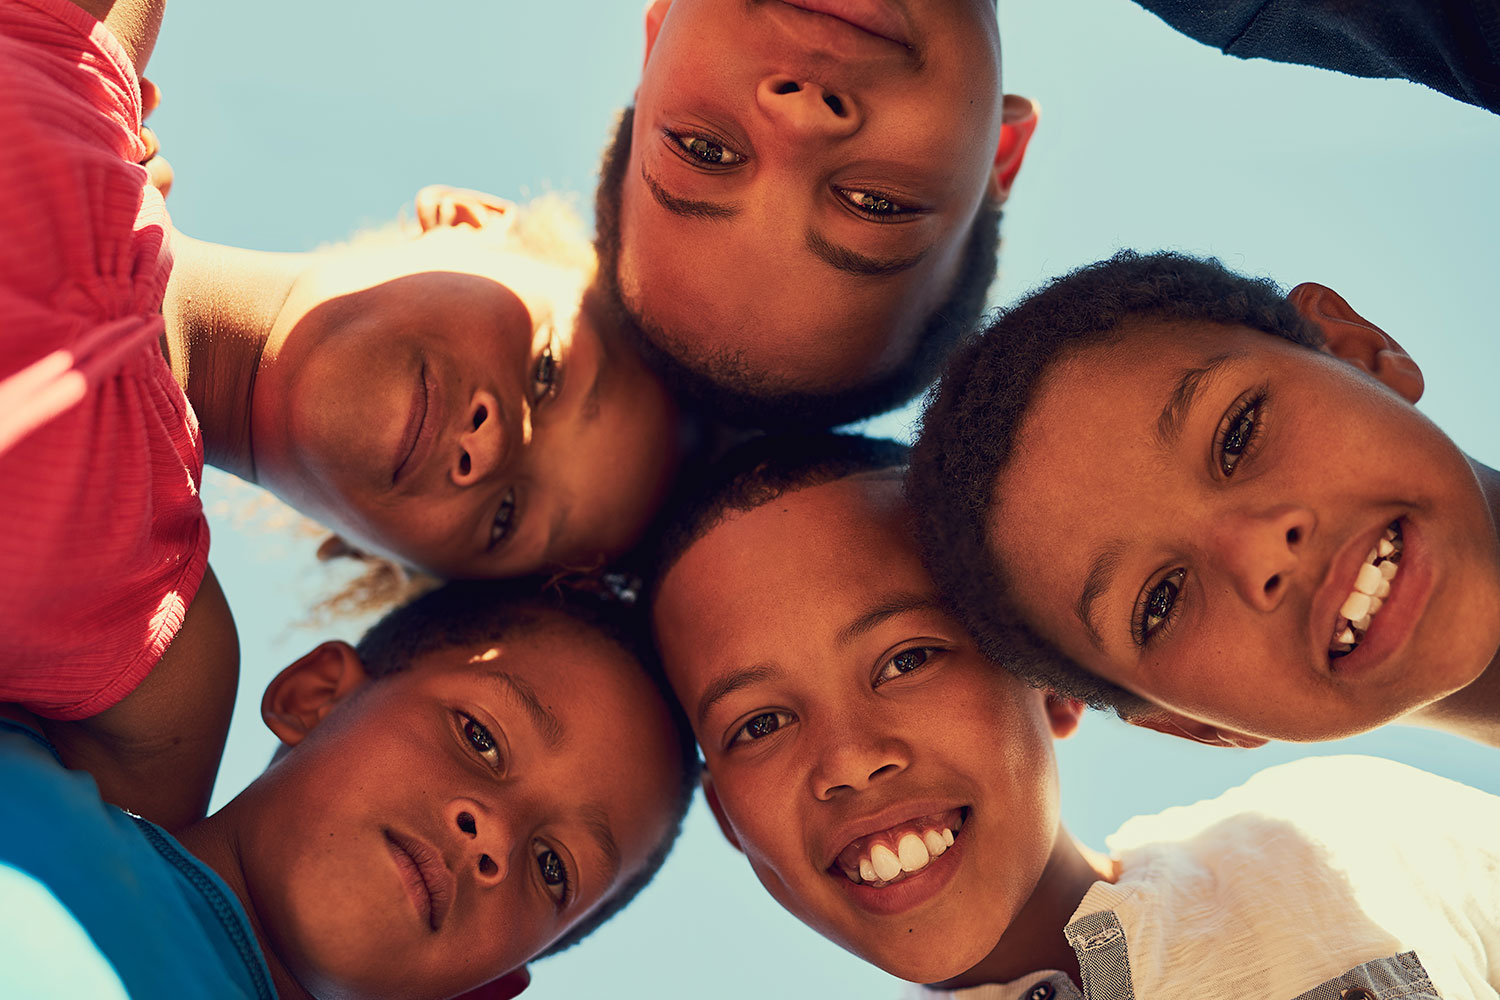 group of 5 African American children looking down at camera